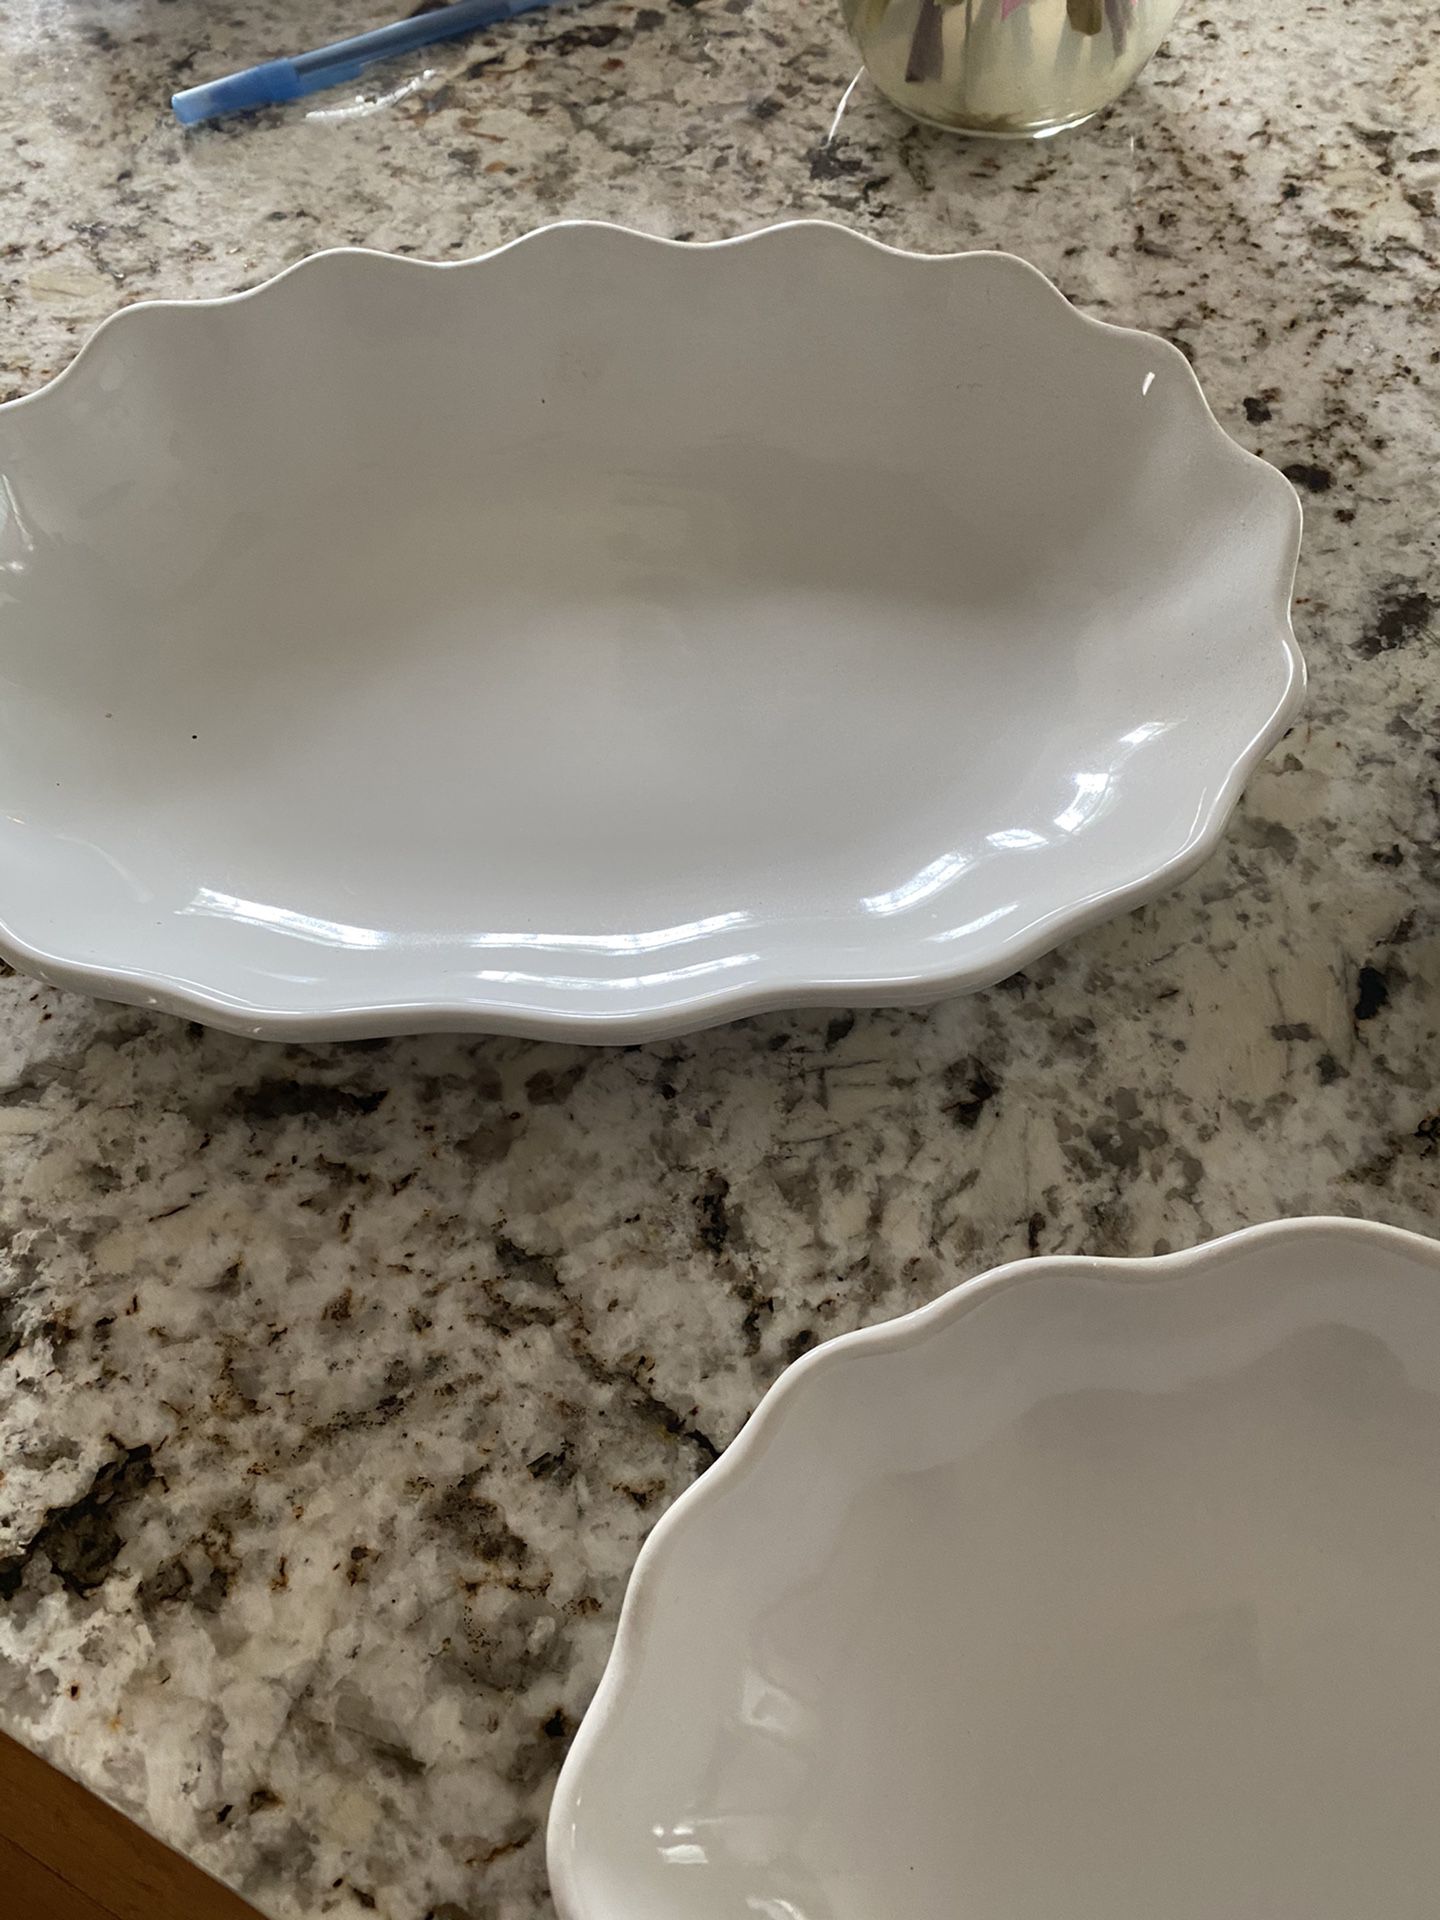 White set of 5 serving dishes. One big platter and 4 smaller ones. New